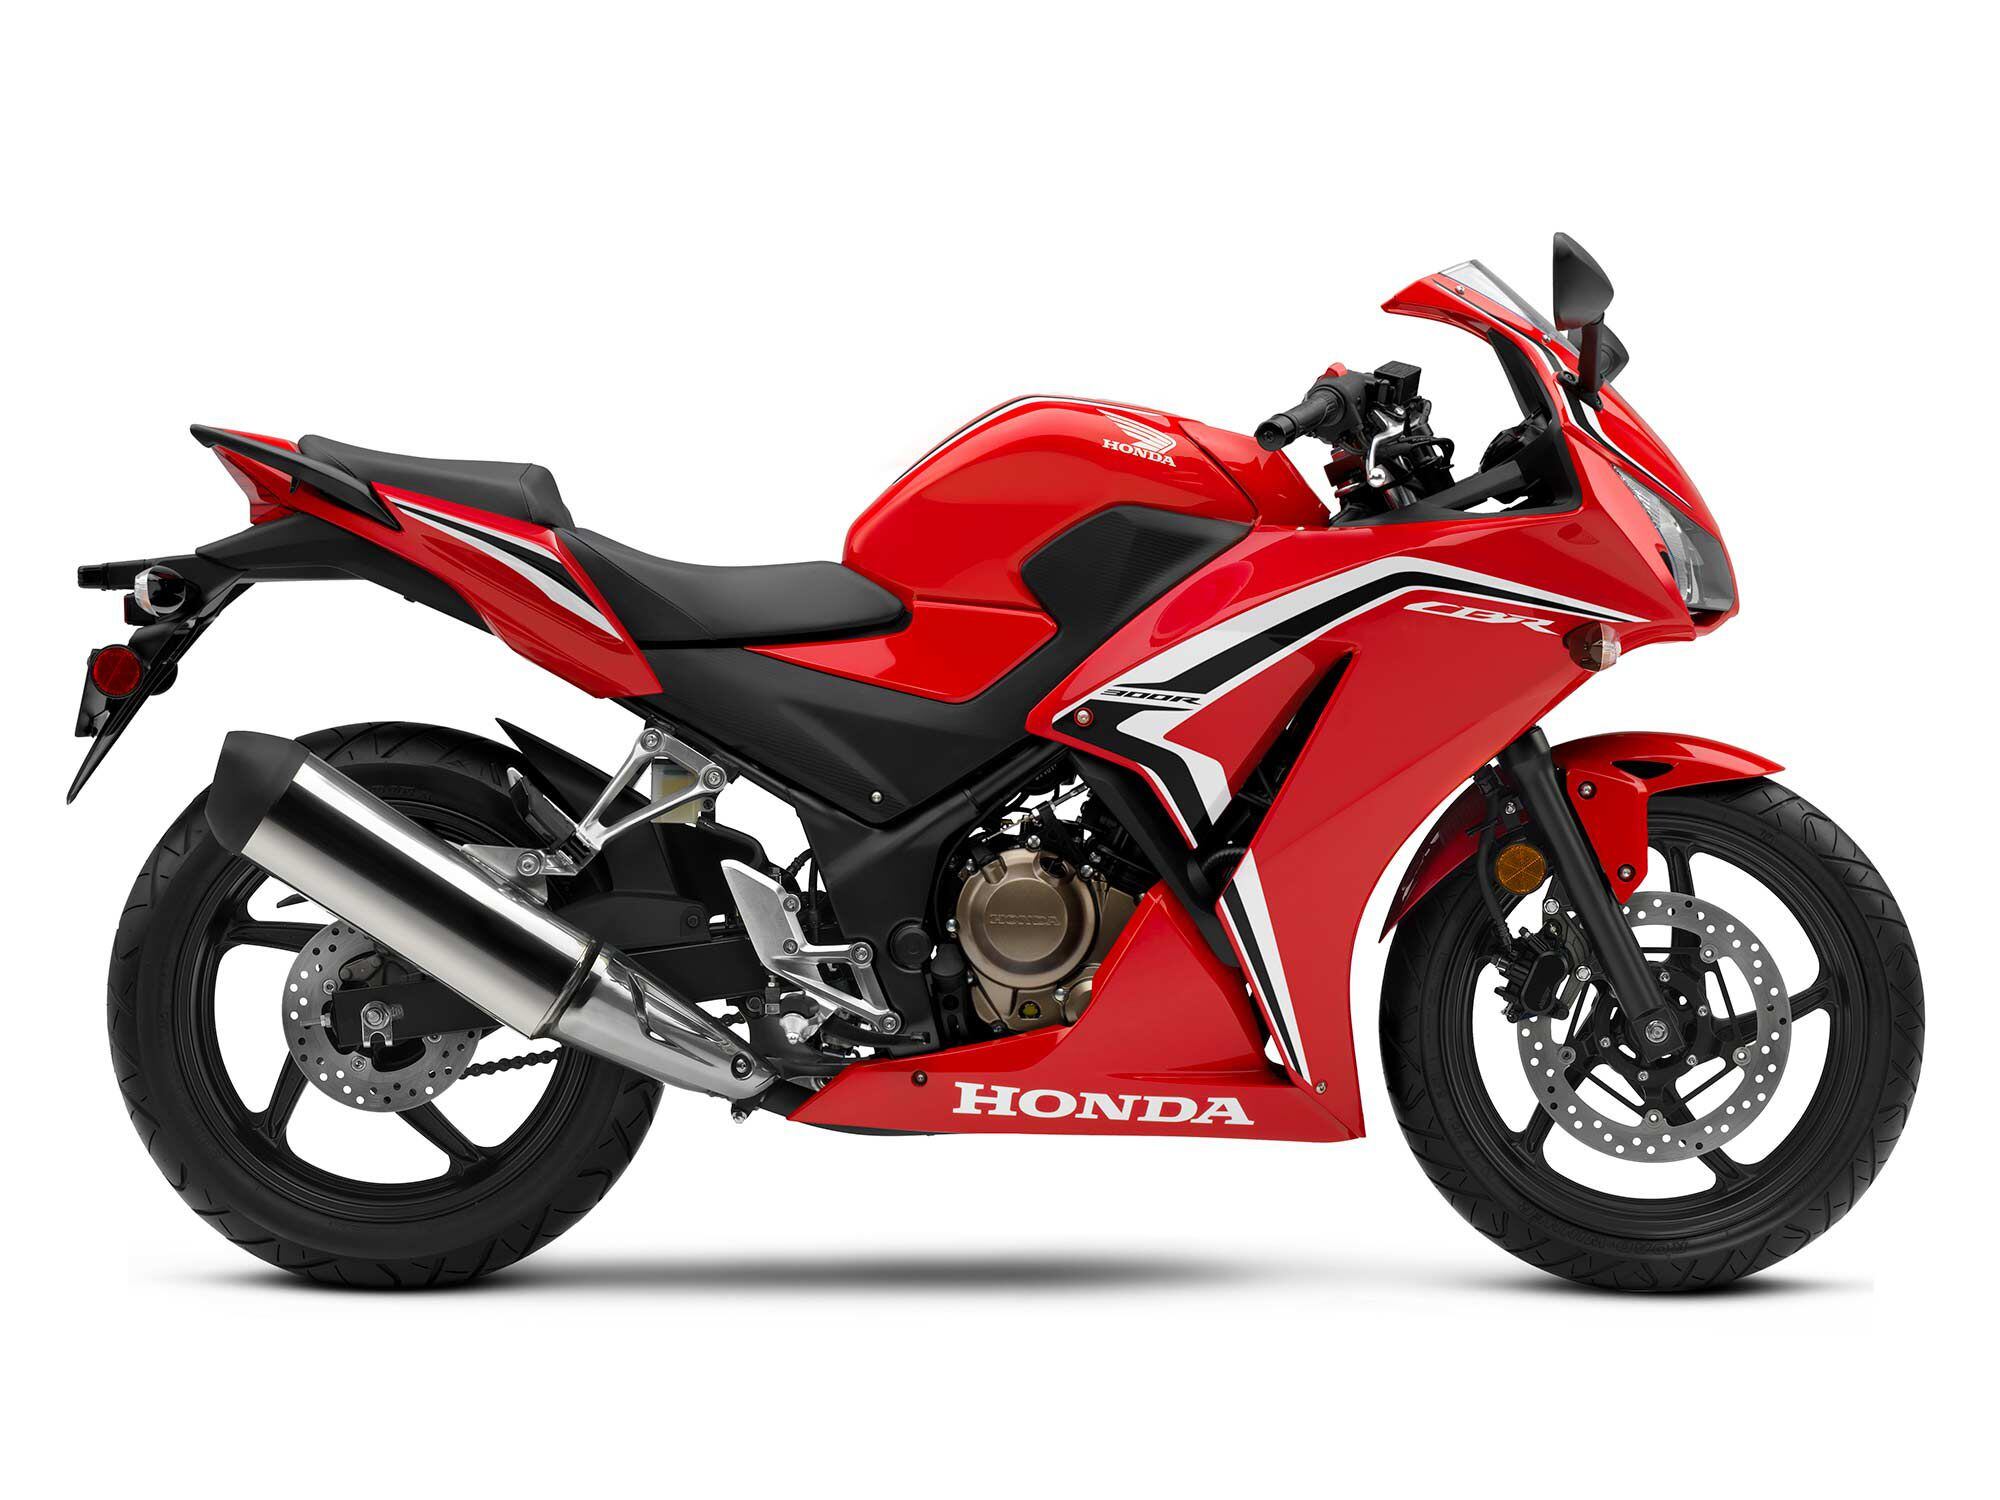 The CBR300R is both beginner and wallet friendly.